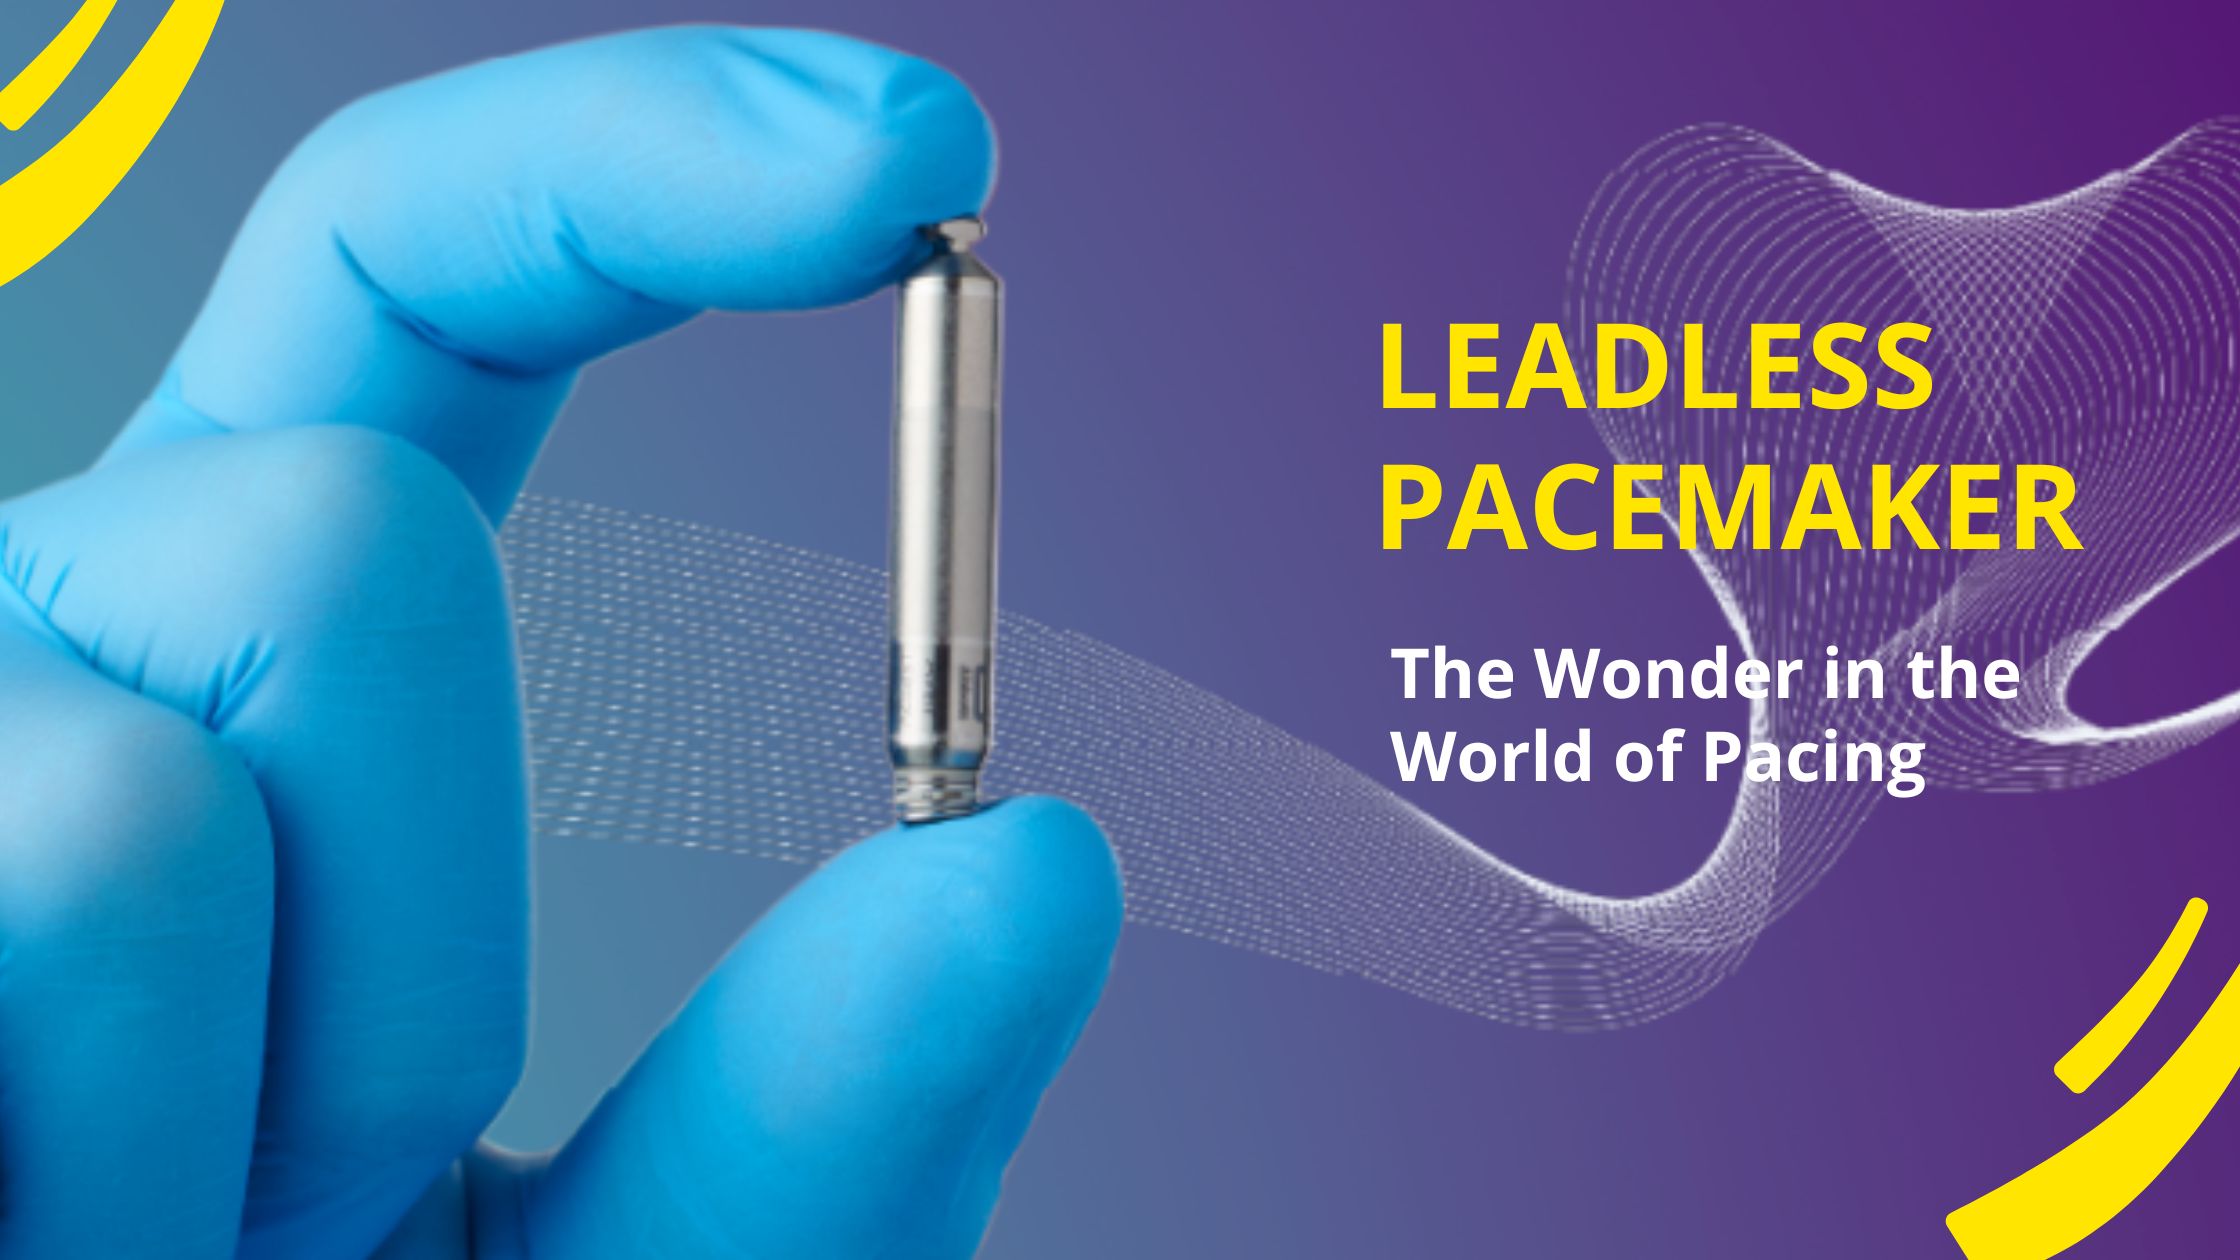 Leadless Pacemaker – The Wonder in the World of Pacing